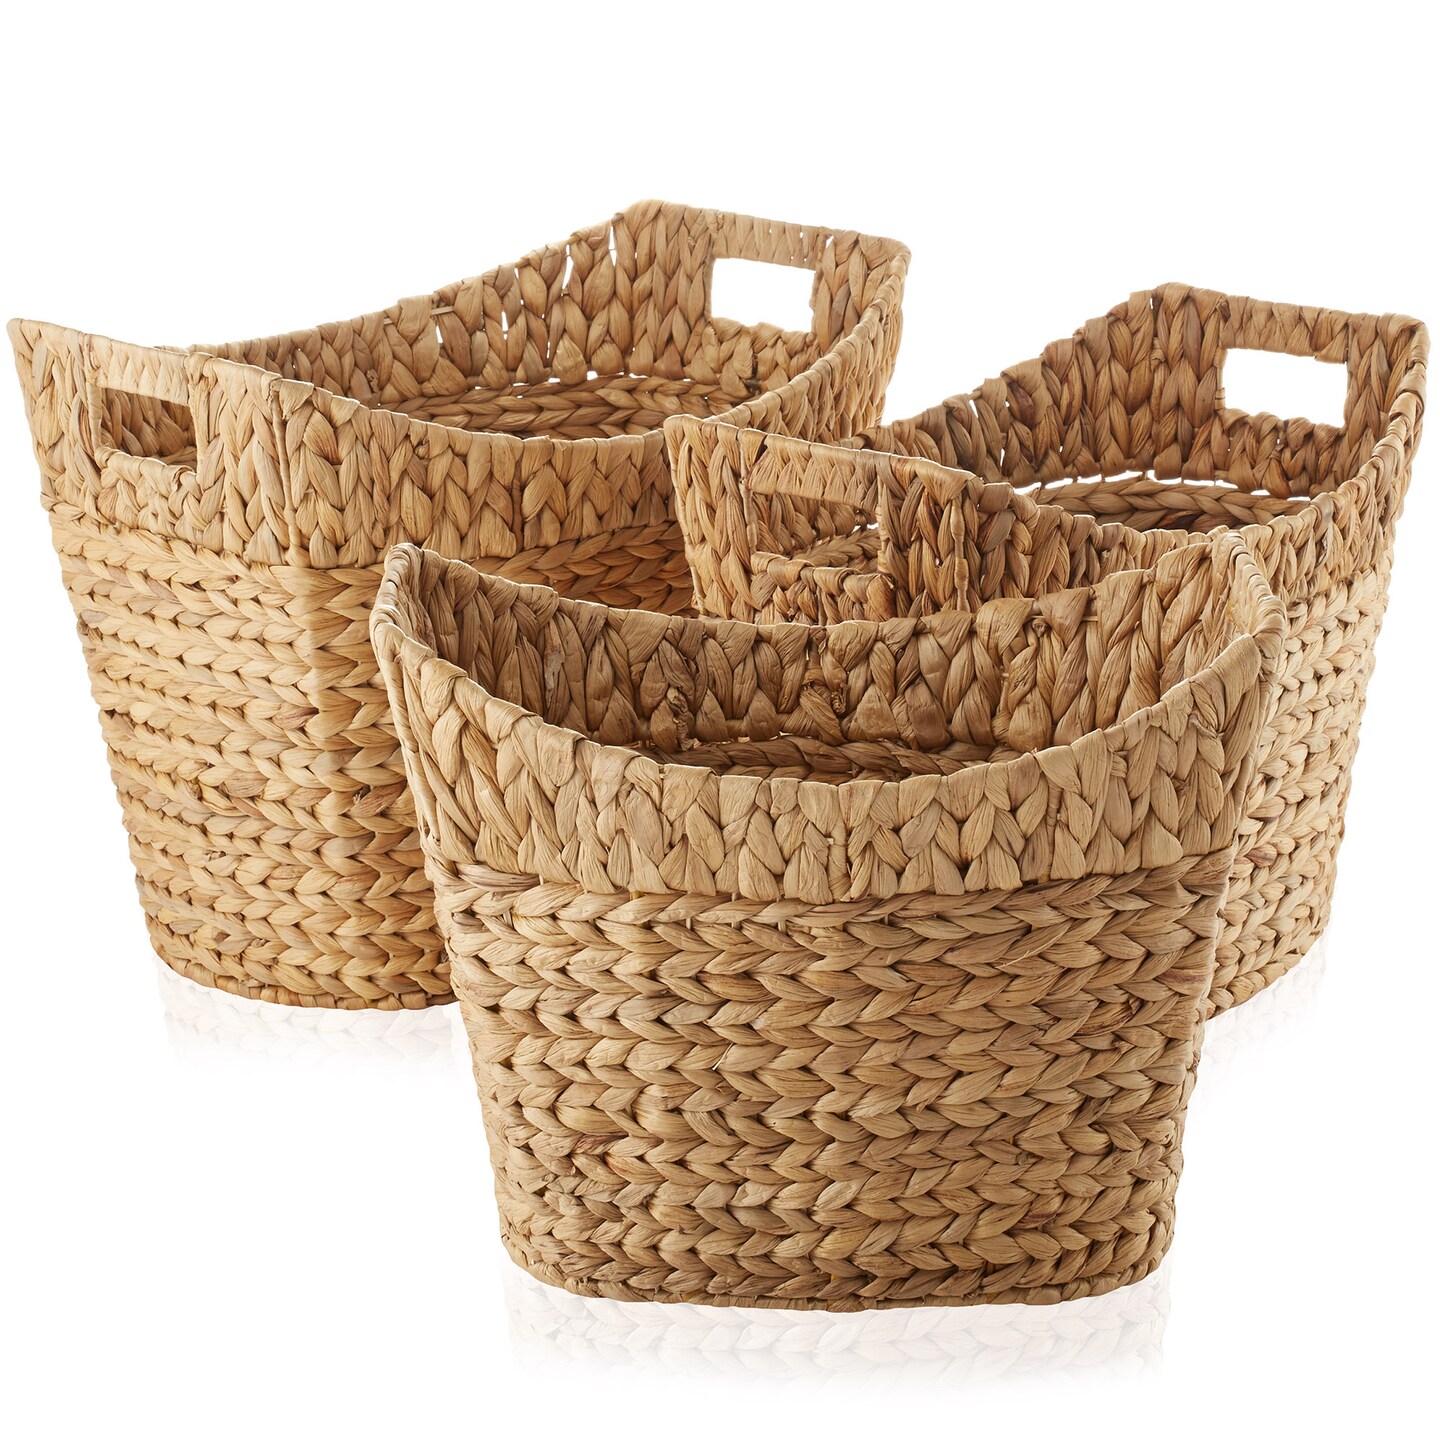 Casafield Set of 3 Stackable Oval Laundry Baskets with Handles - Natural, Woven Water Hyacinth Storage Totes for Throw Blankets, Bathroom, Bedroom, Living Room